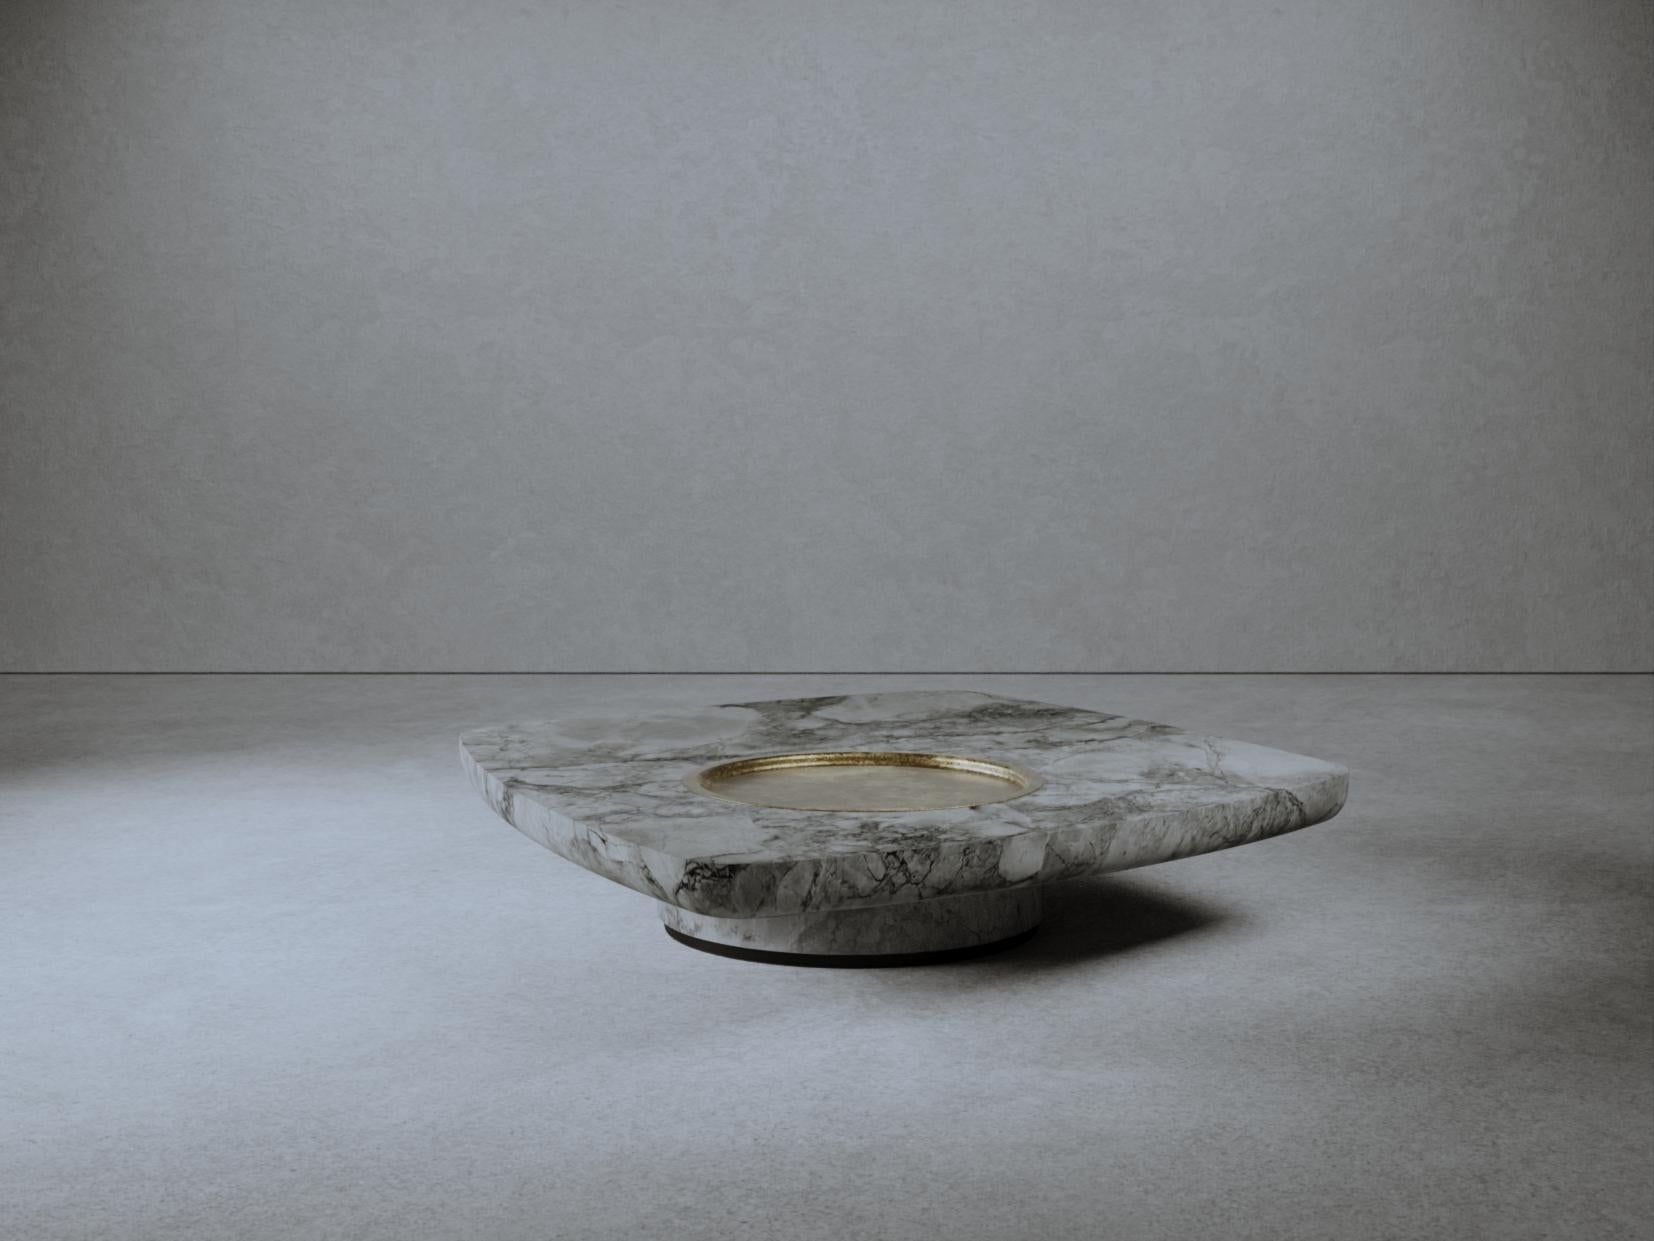 Low Blackbird Marble Coffee Table by Gio Pagani
Dimensions: D 120 x W 127 x H 26 cm.
Materials: Superwhite marble and raw brass metal tray.

In a fluid society capable of mixing infinite social and cultural varieties, the nostalgic search for